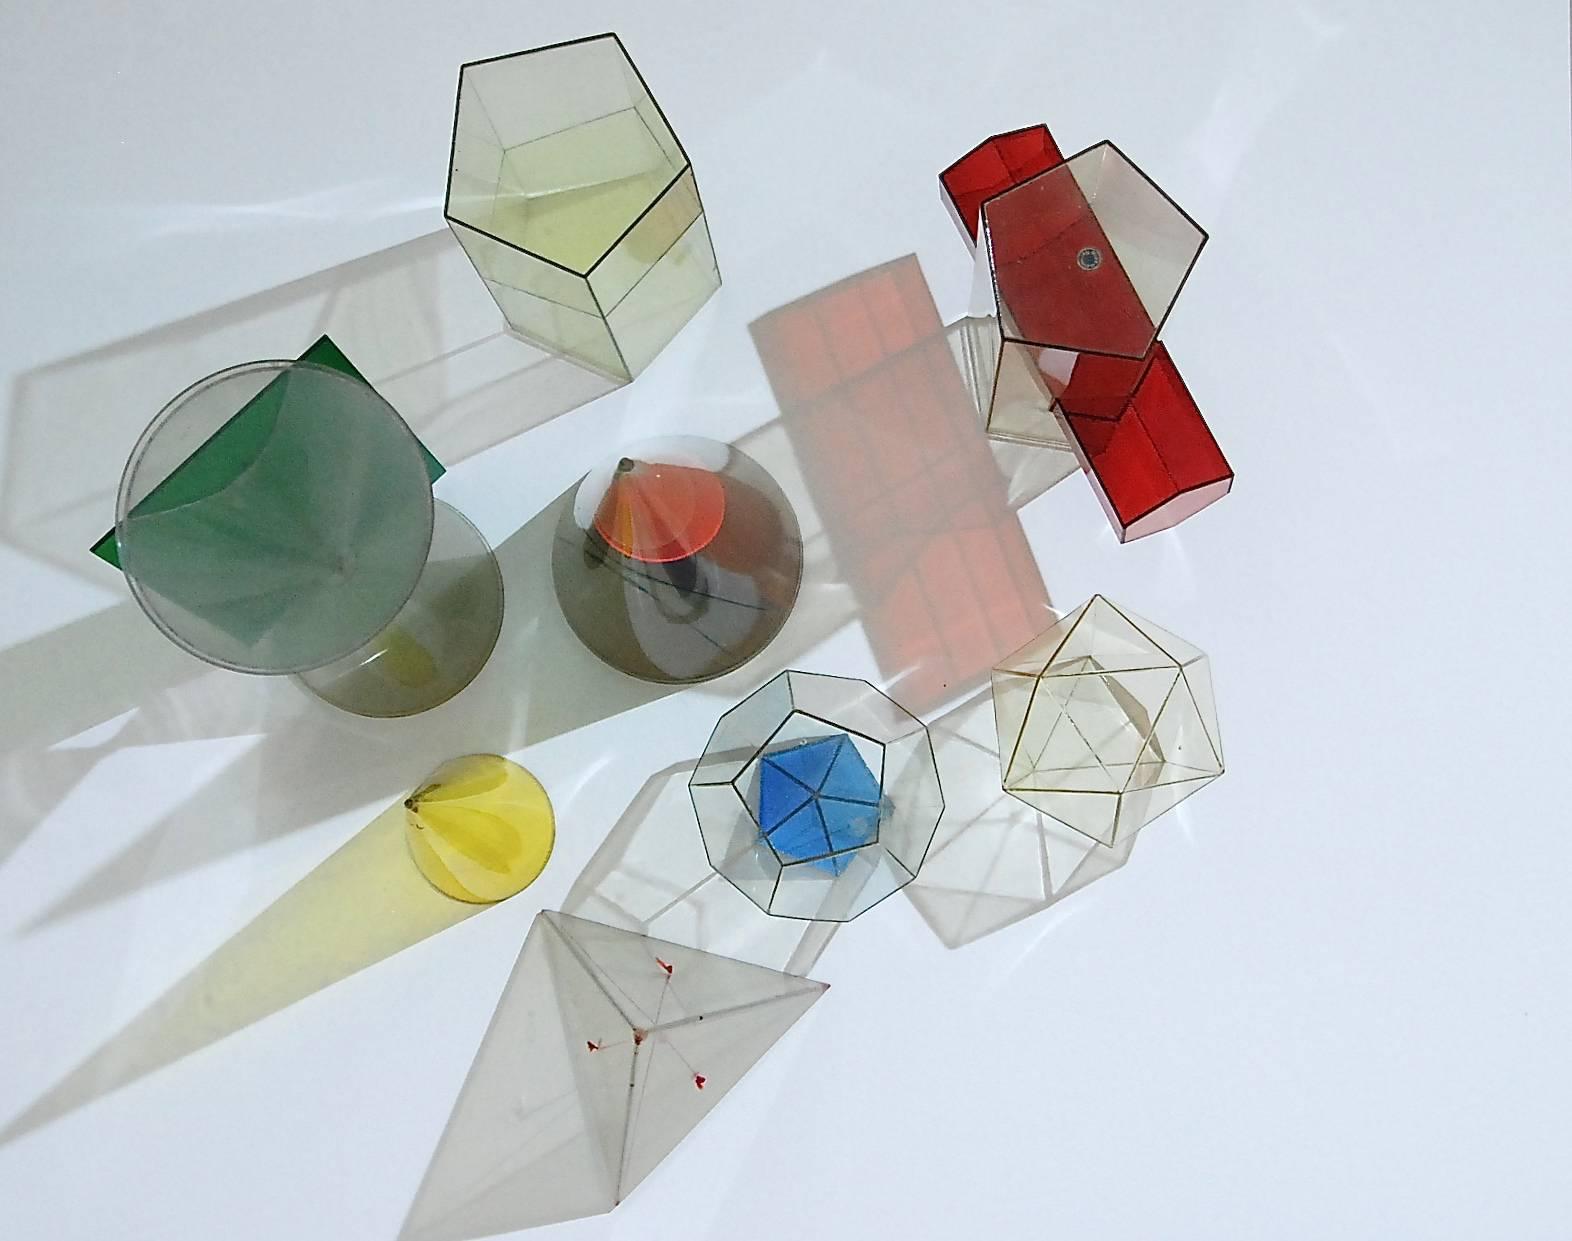 German Collection of Eight Geometric Solids